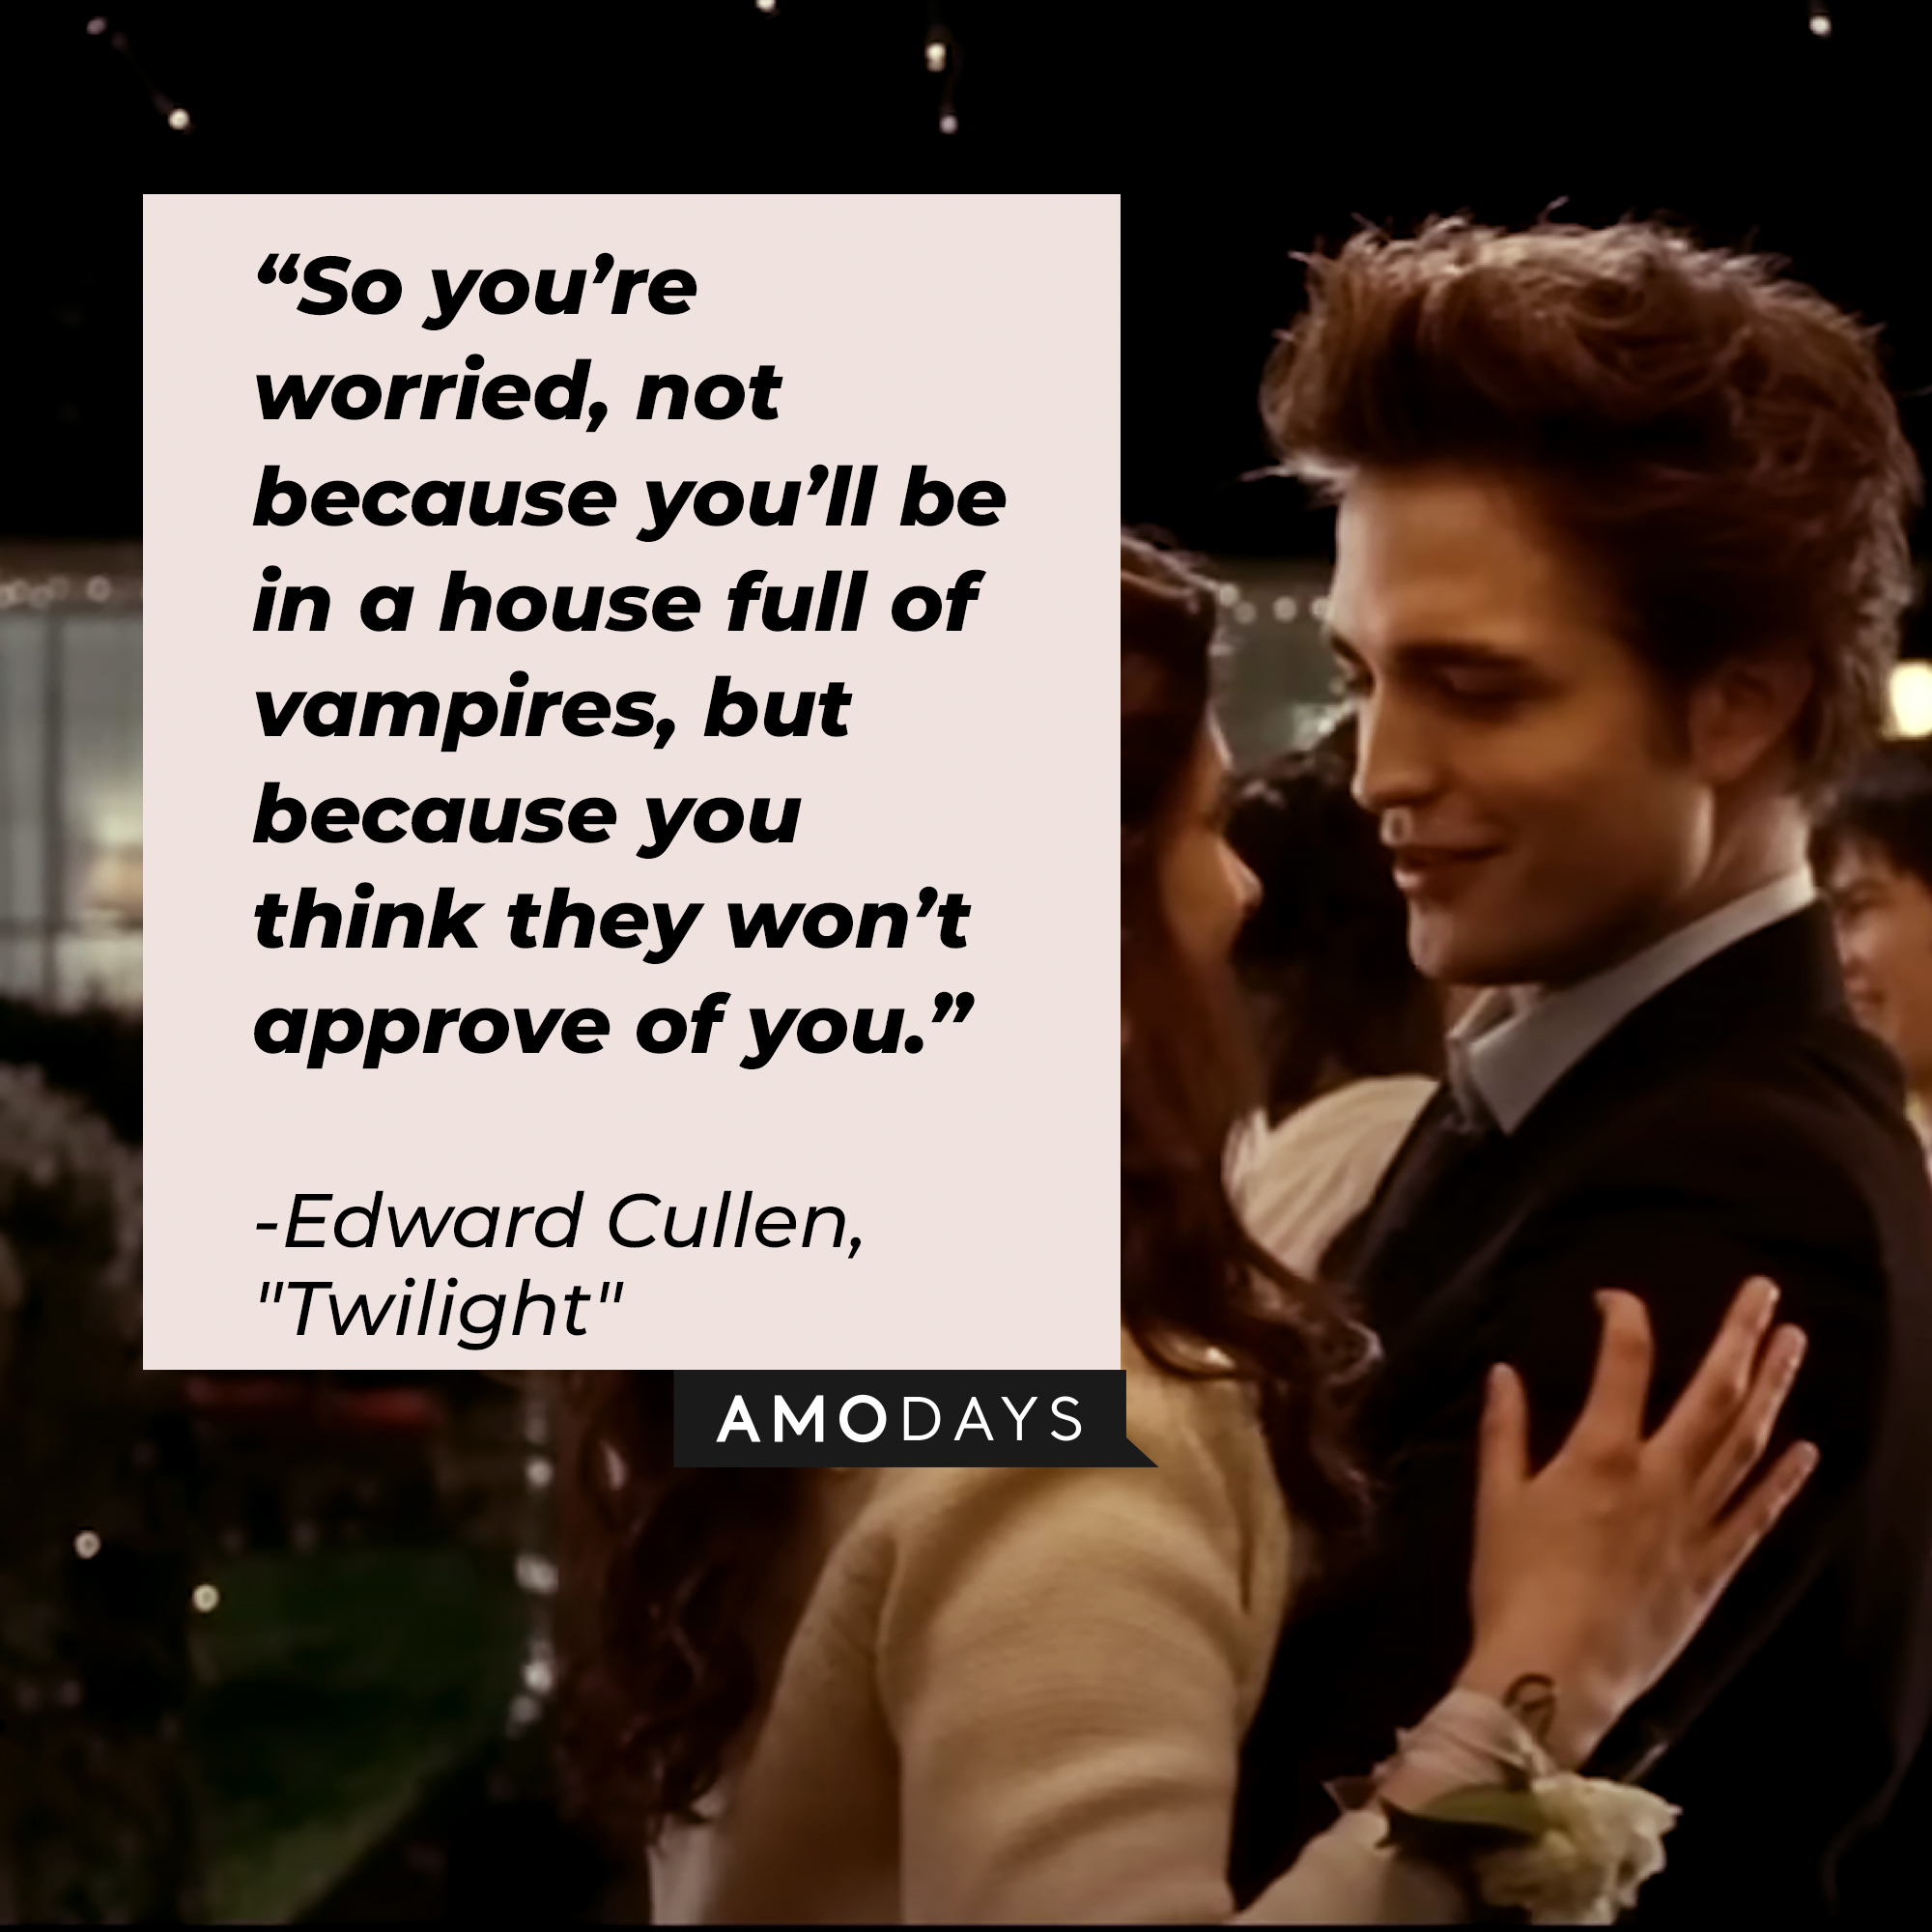 Edward Cullen with his quote: “So you’re worried, not because you’ll be in a house full of vampires, but because you think they won’t approve of you.” | Source: Facebook.com/twilight